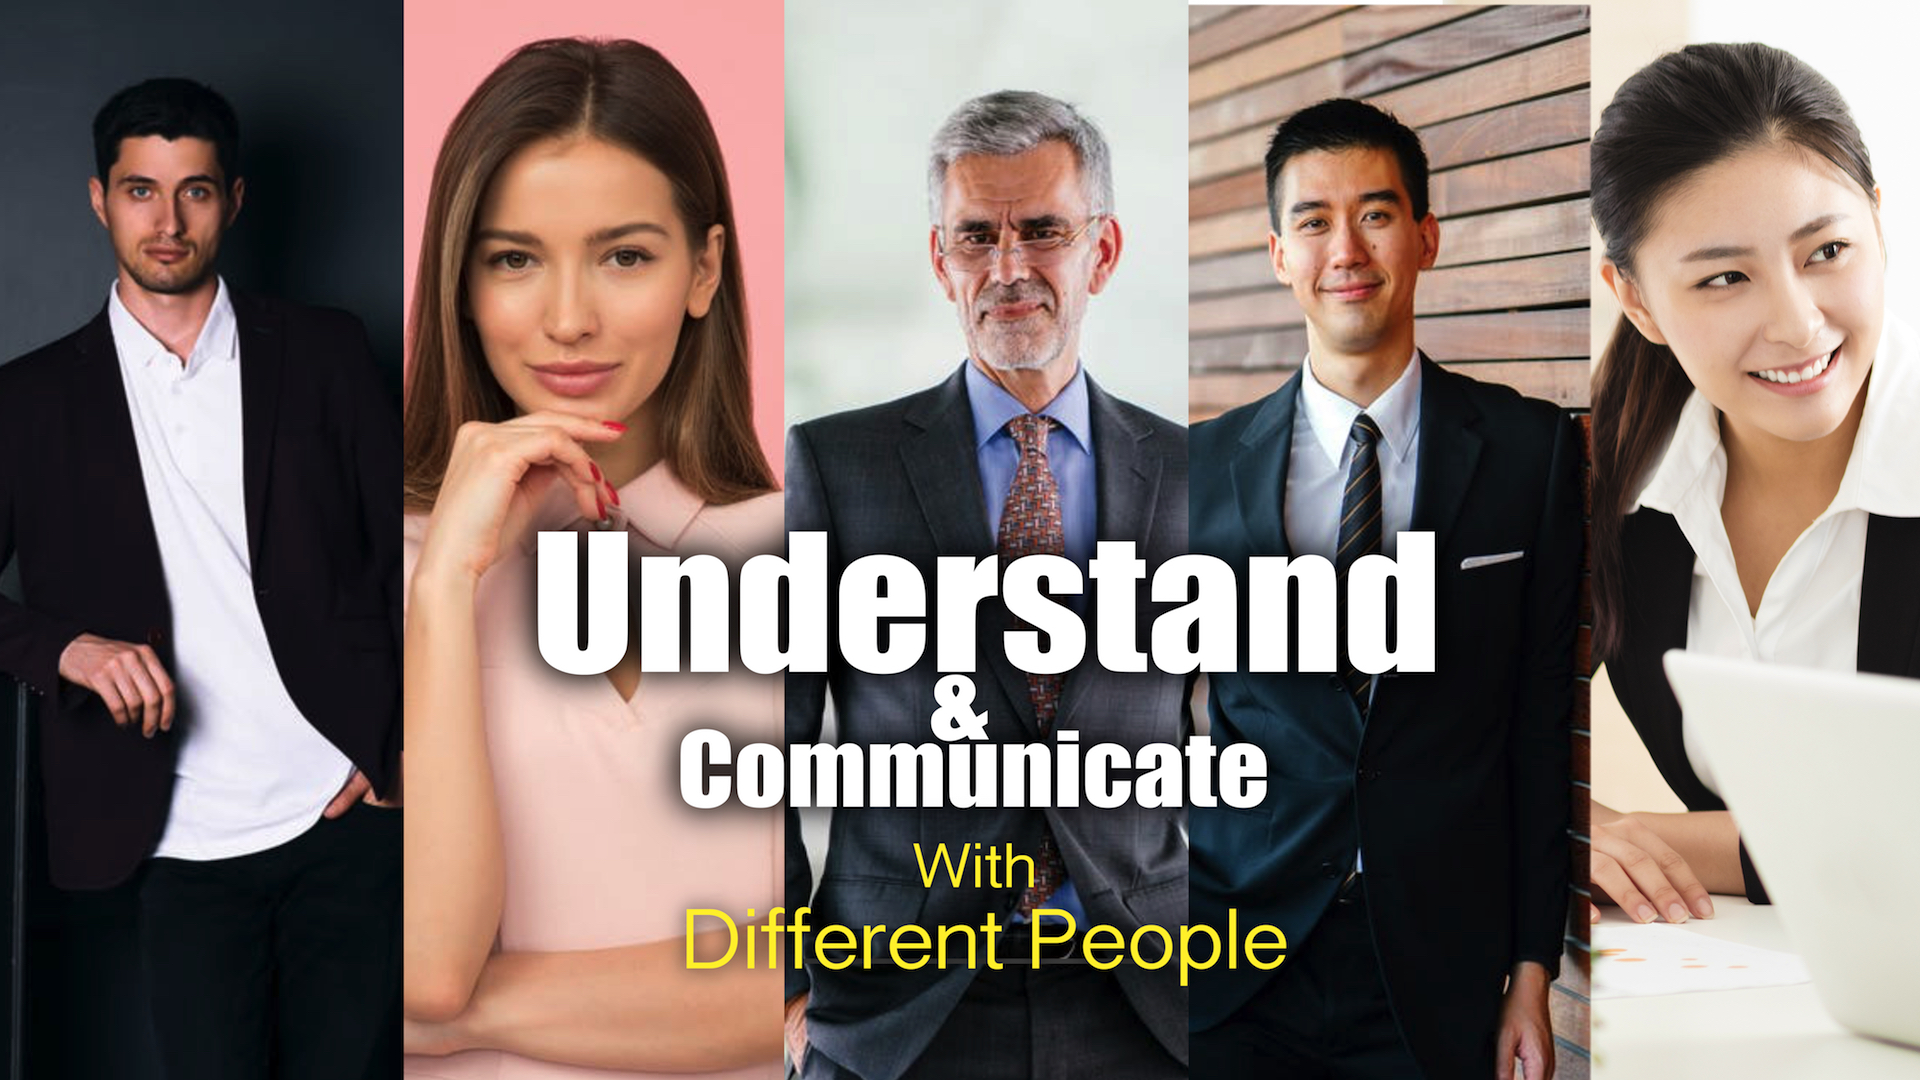 Understand & Communicate with Different People